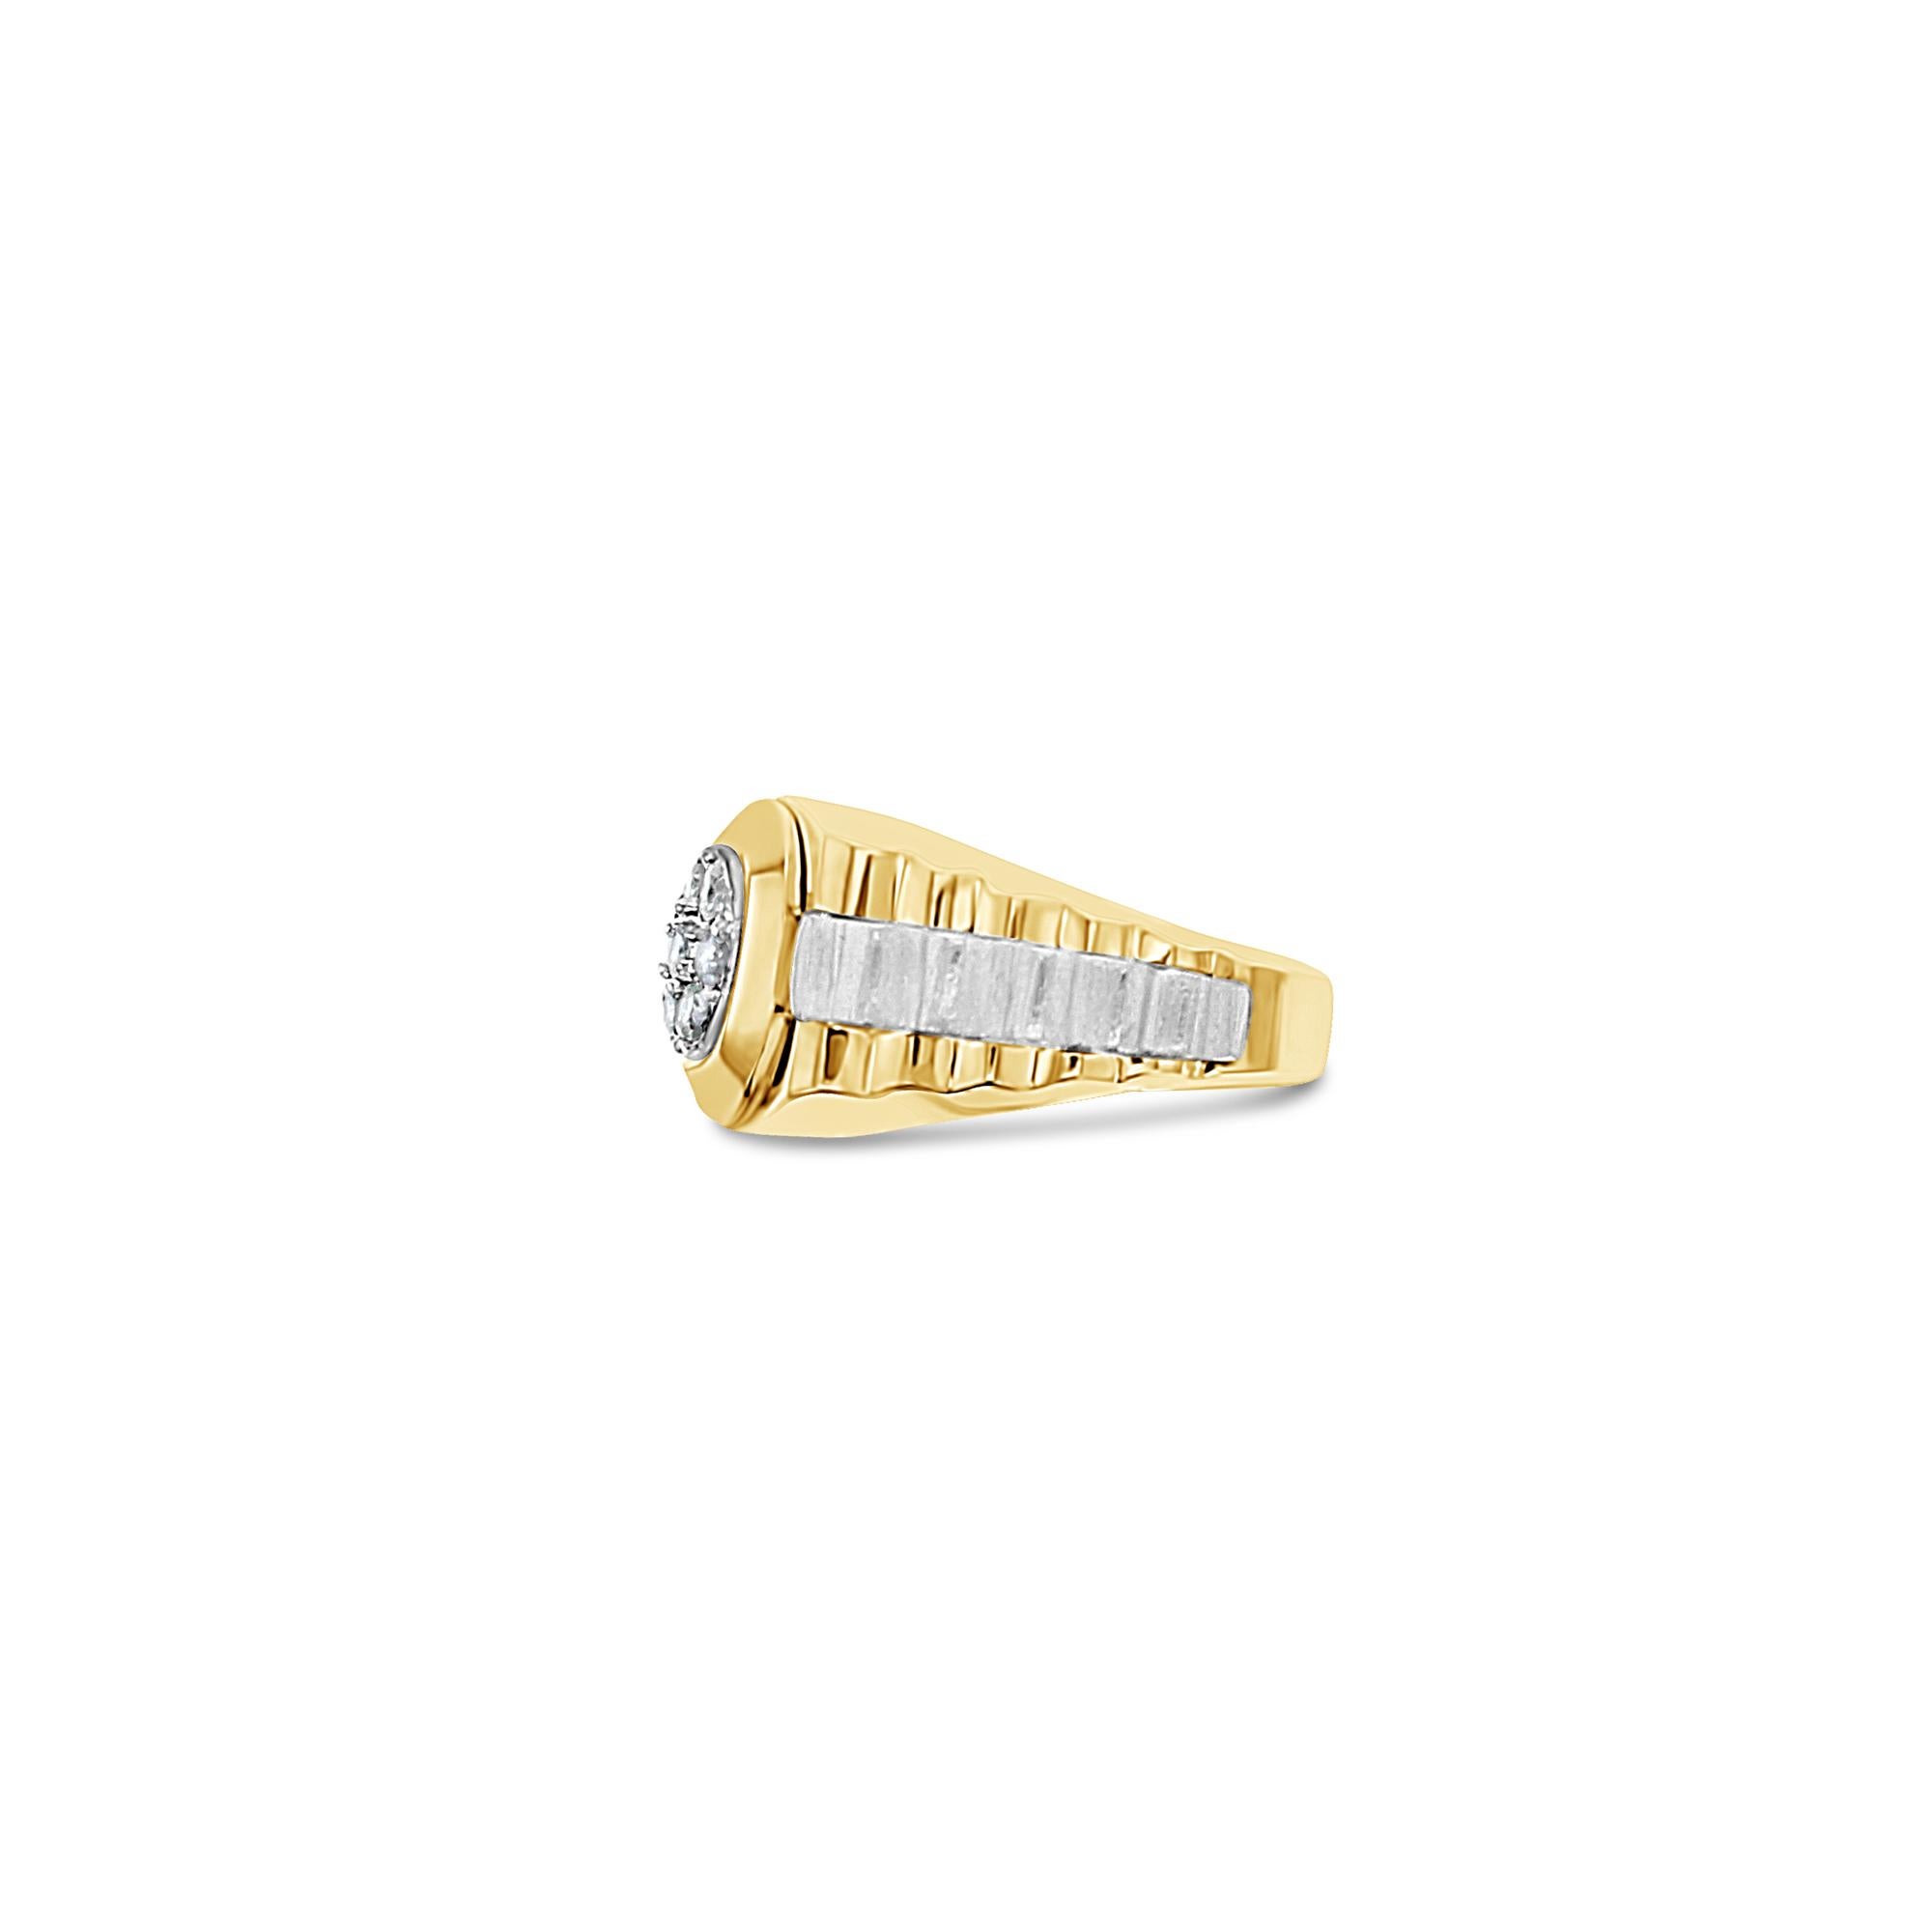 ♥ Product Summary ♥

Details: Polished Bezel, Bark Center & Polished Sides 
Main Stone: Diamonds
Approx. Total Carat Weight: .50cttw 
Diamond Color: H
Diamond Clarity: SI2
Number of Stones: 7
Metal Choice: 14k Two-Toned Gold 